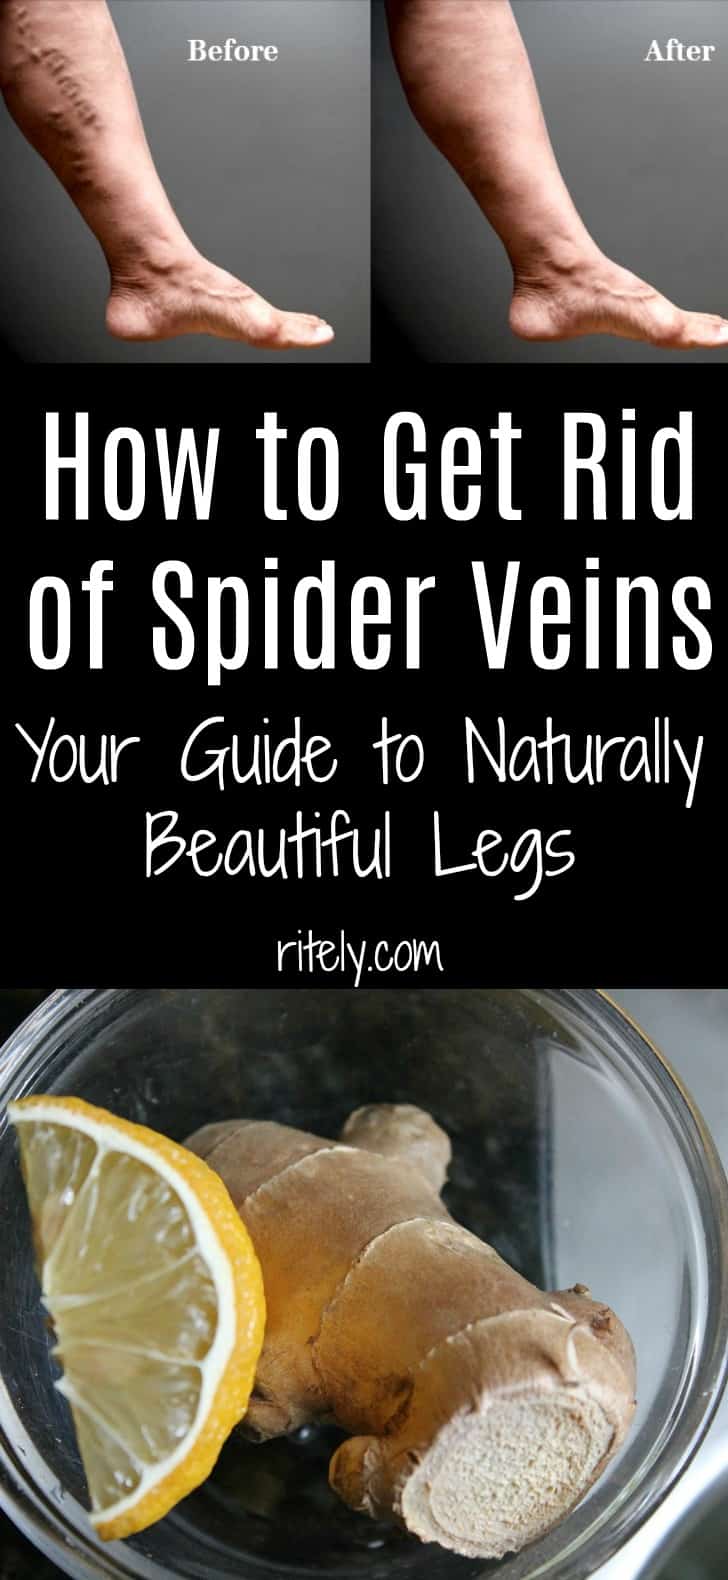 How to Get Rid of Spider Veins: Your Guide to Naturally Beautiful Legs